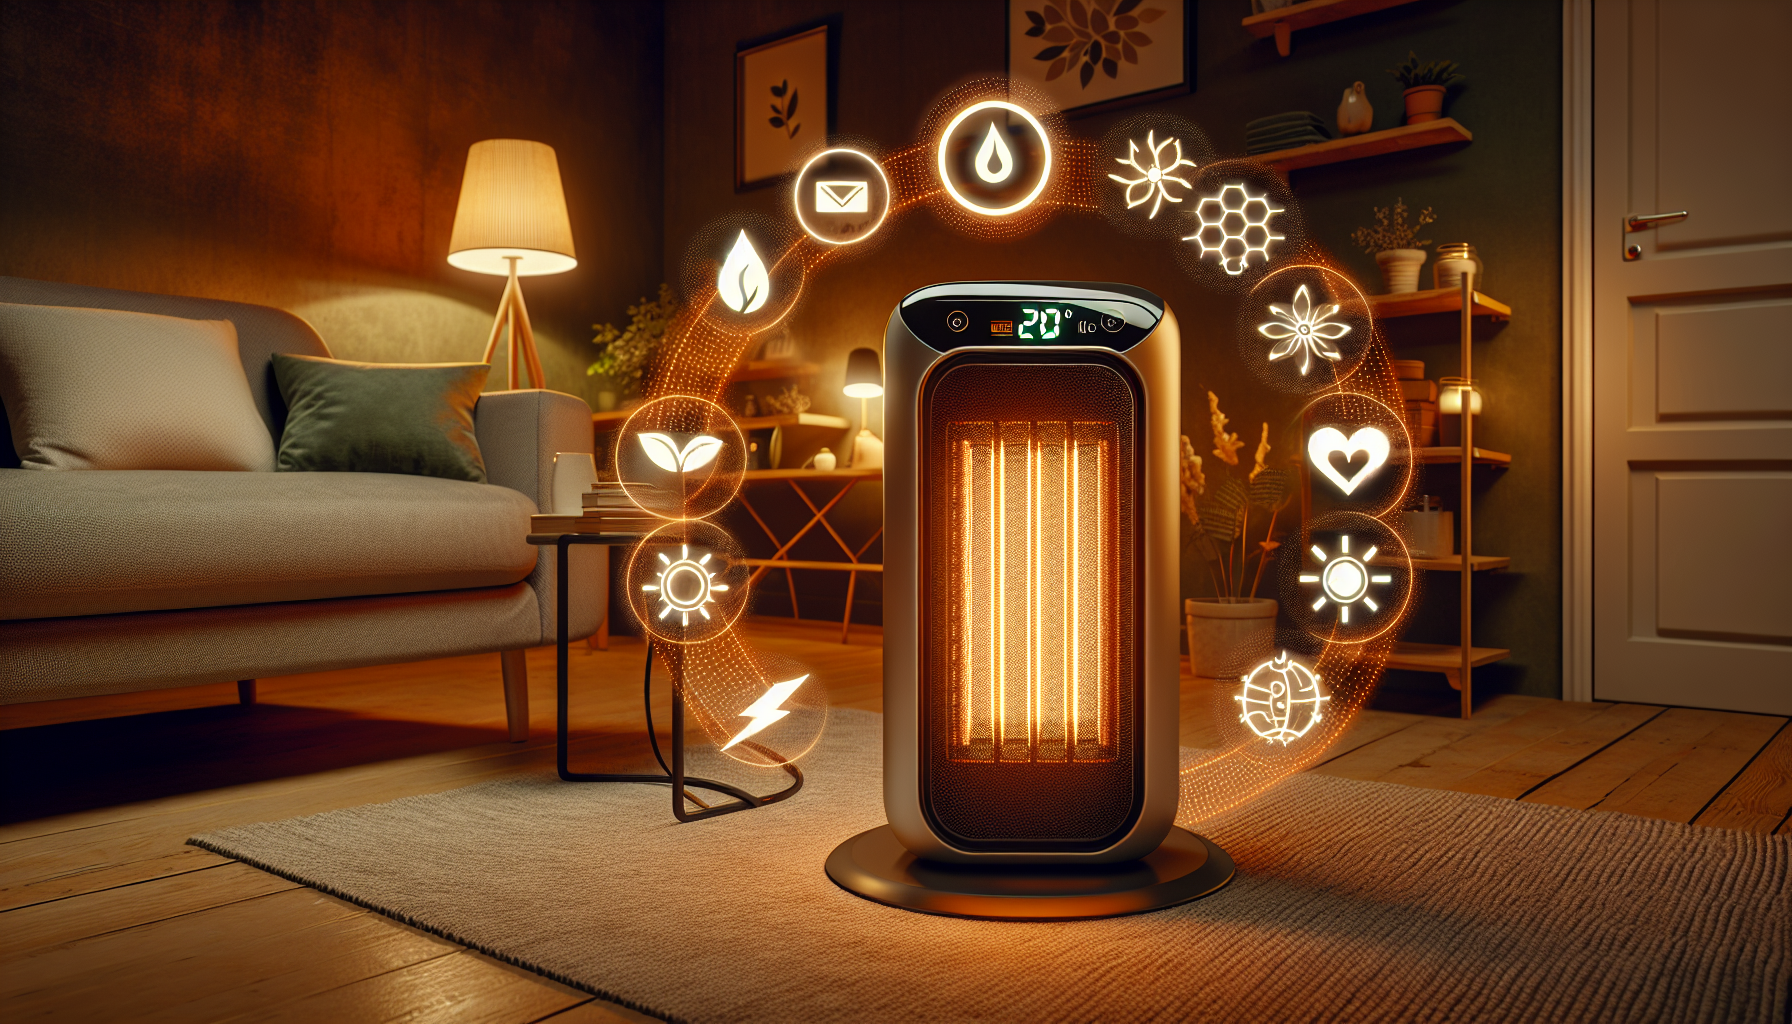 Are there eco-friendly space heaters with energy-efficient heating elements?